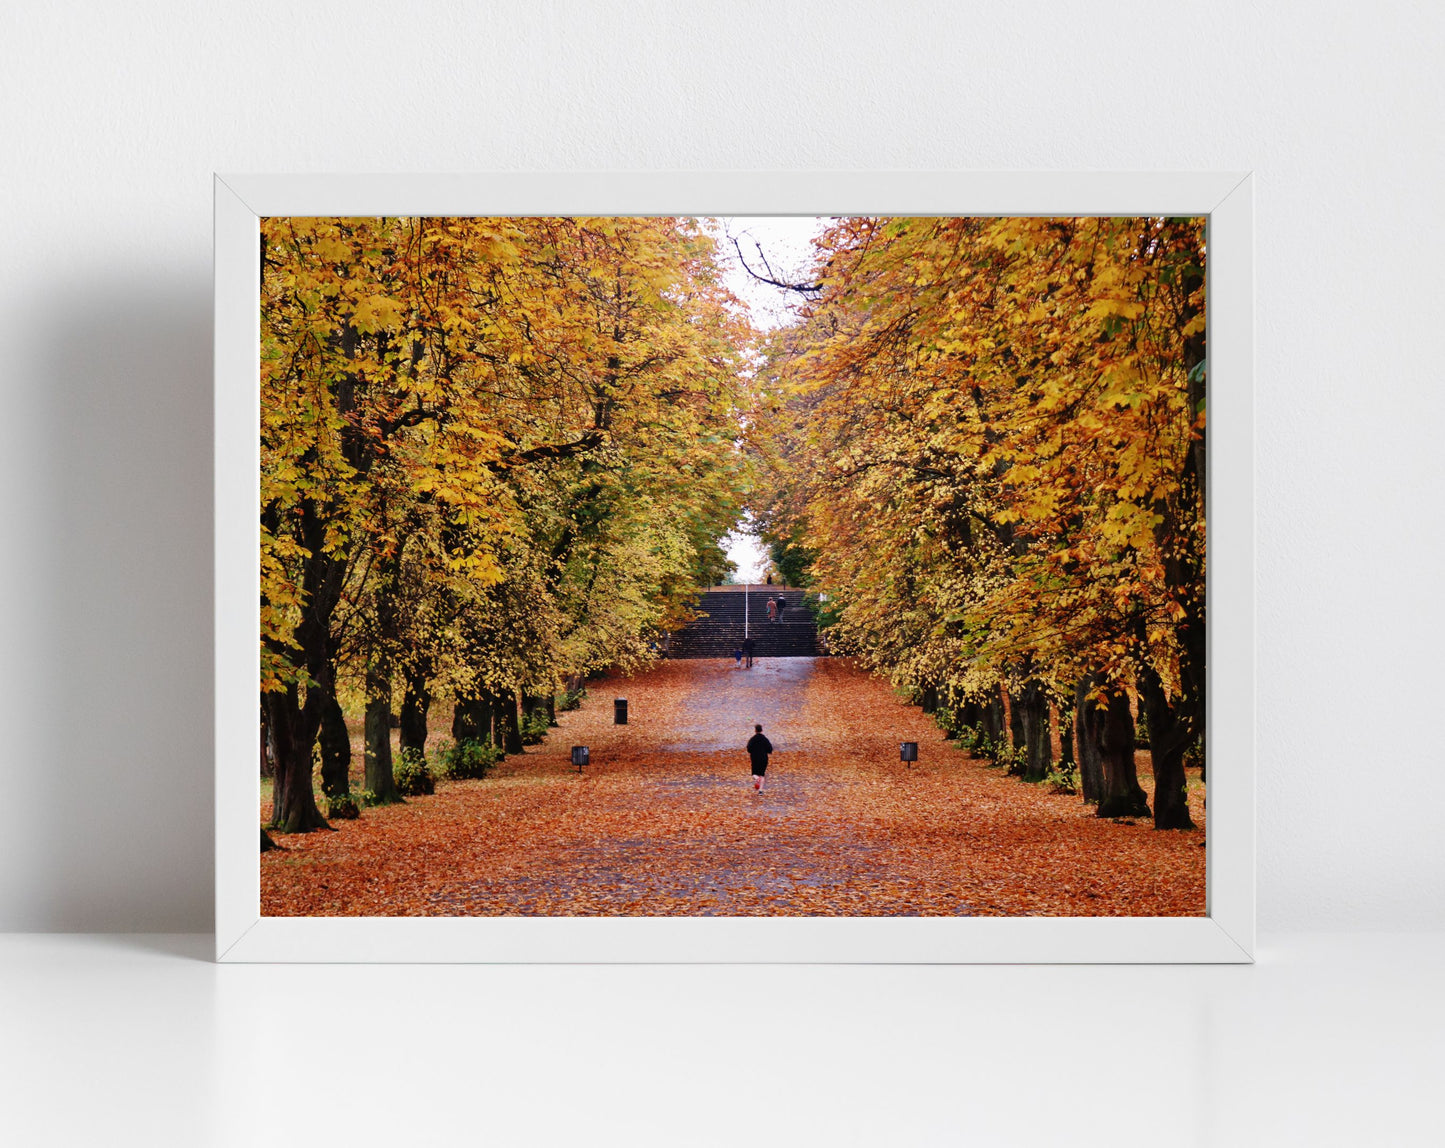 Glasgow Queen's Park Autumn Fall Foliage Photography Print Poster Wall Art